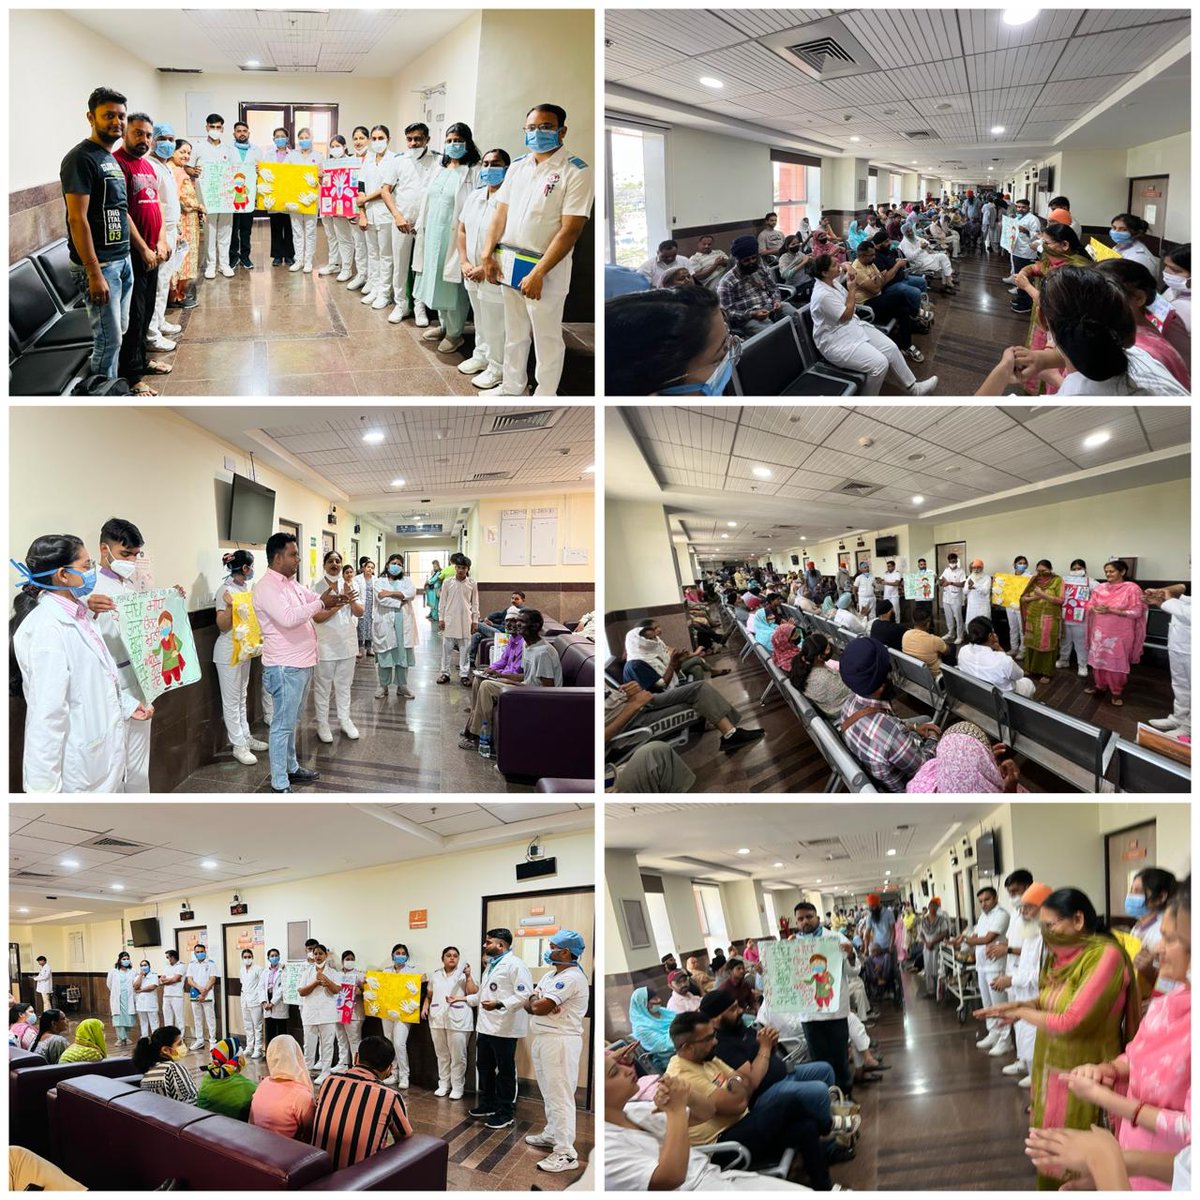 Hospital Infection Prevention Control team at @HBCHRC_Punjab organized a #Handhygiene #Awarenesscampaign among patients and their visitors on the occasion of Hand Hygiene Week based on the theme 'Promoting Knowledge and Capacity Building' promoted by @WHO.